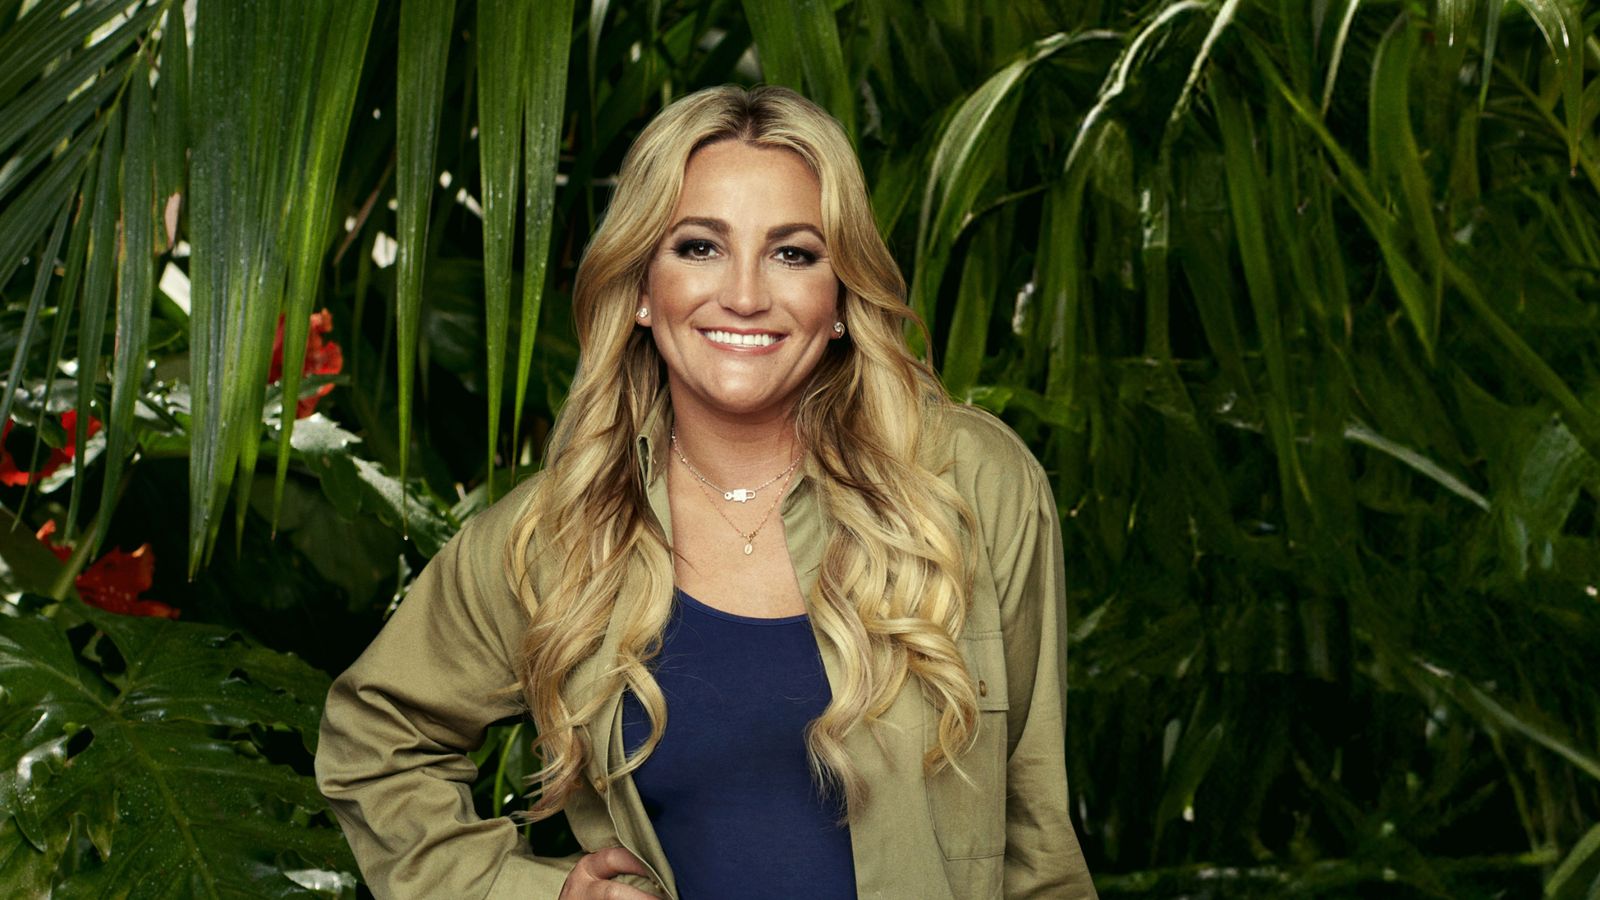 Jamie Lynn Spears leaves I'm A Celebrity on medical grounds